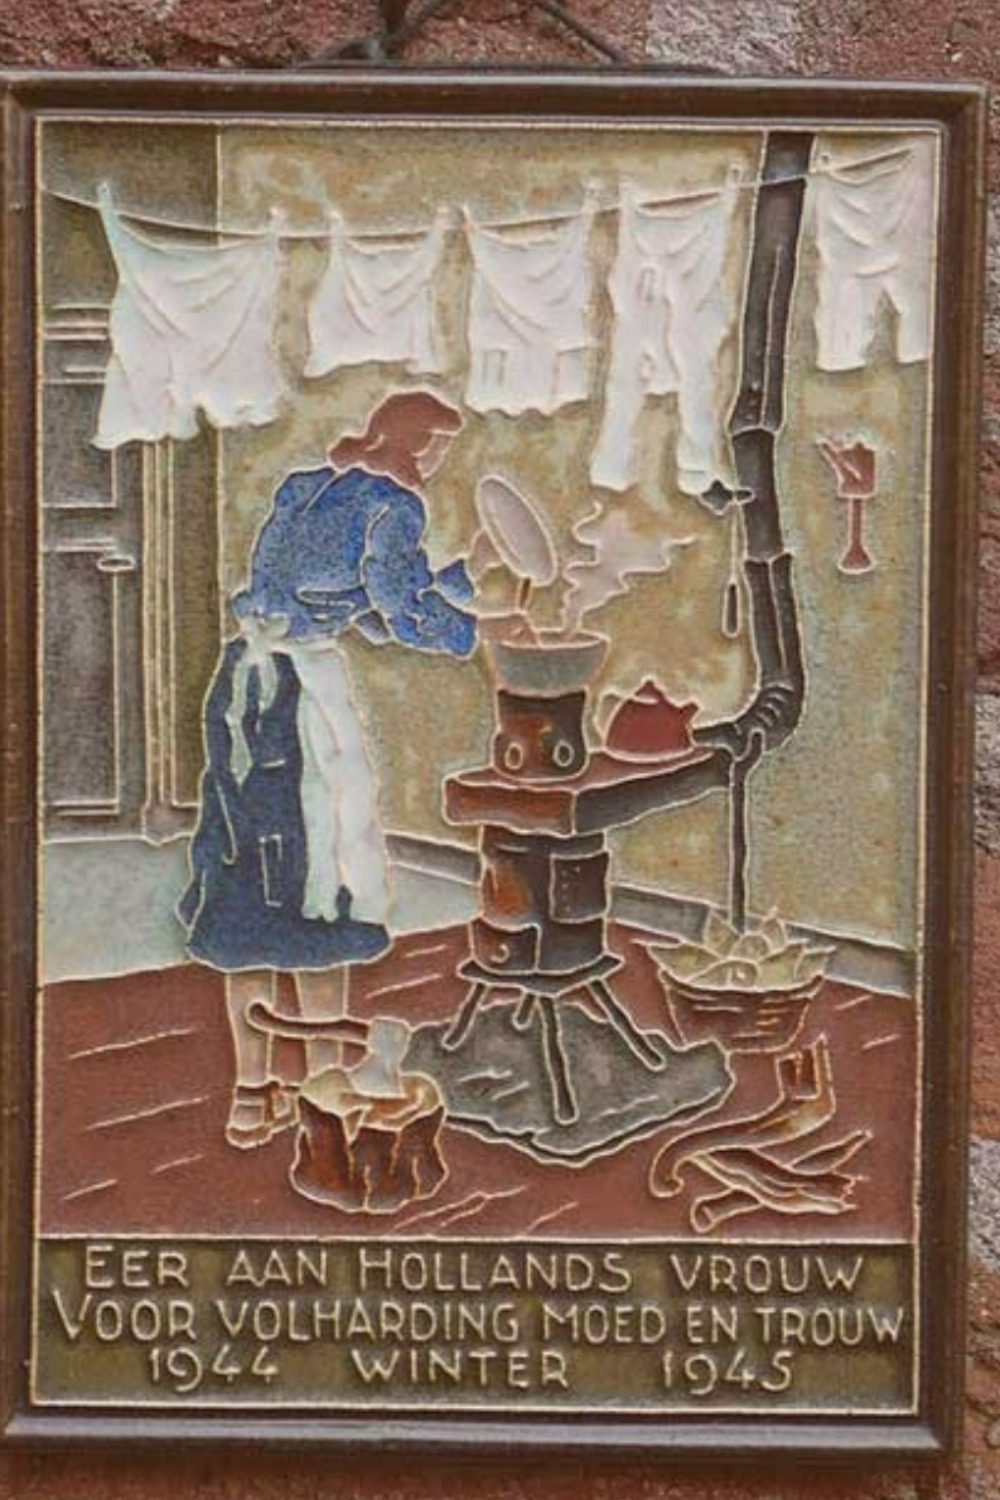 A wall tile shows a 1940s woman tend a stove below a washing line.